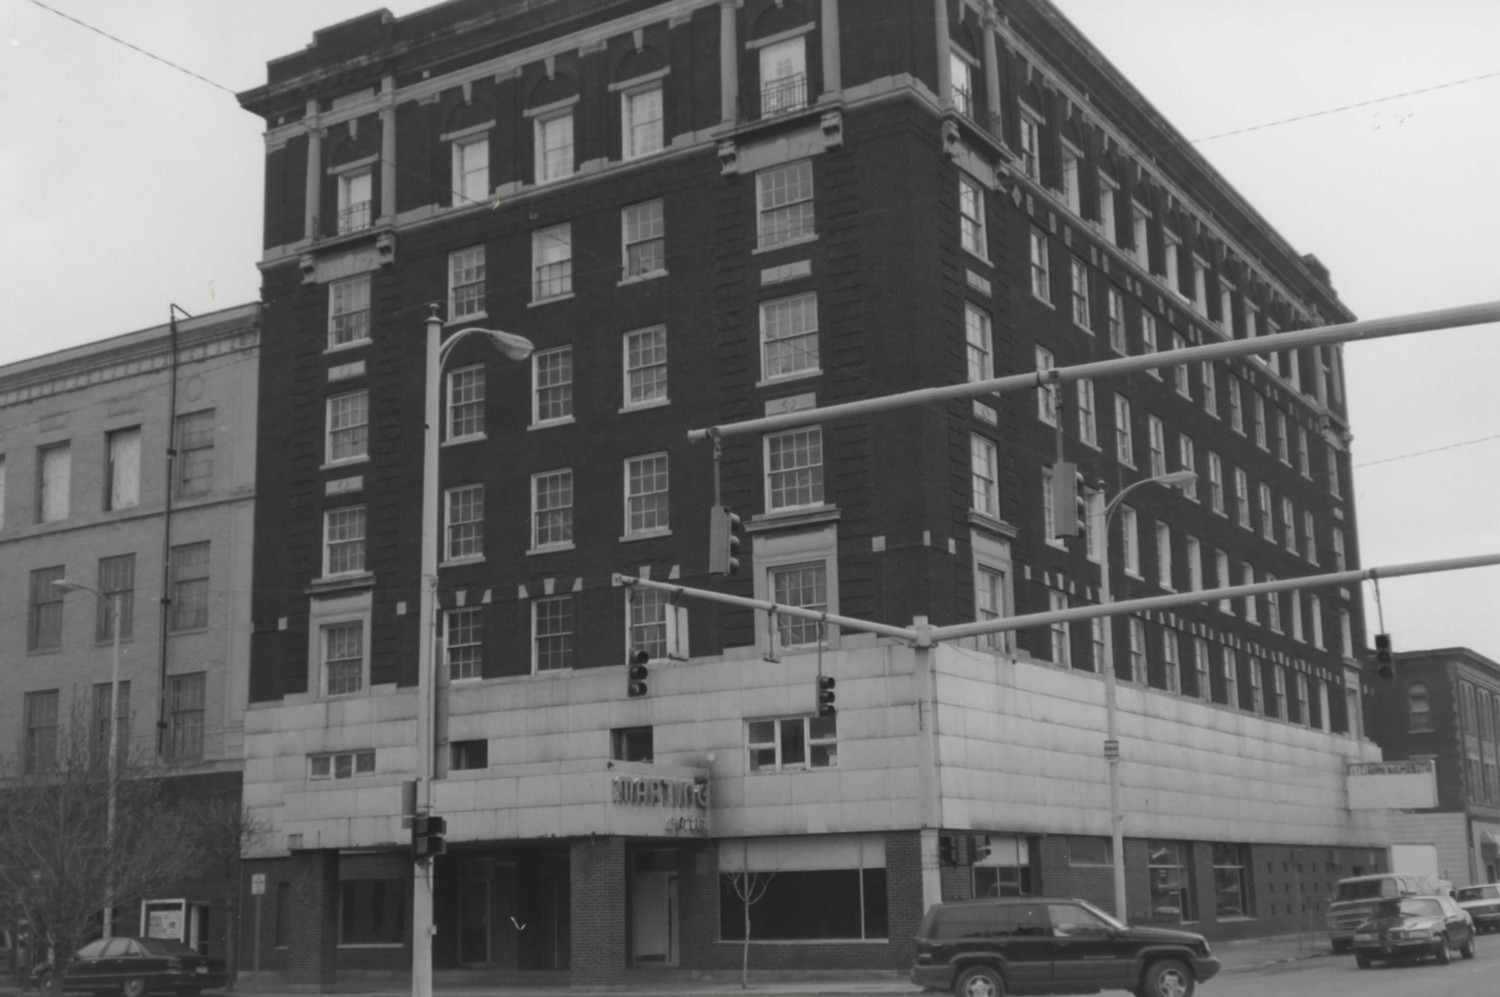 Marting Hotel, Ironton Ohio North (front) Elevation - southeast corner of Park Avenue & South Second Street, from Second Street (1998)